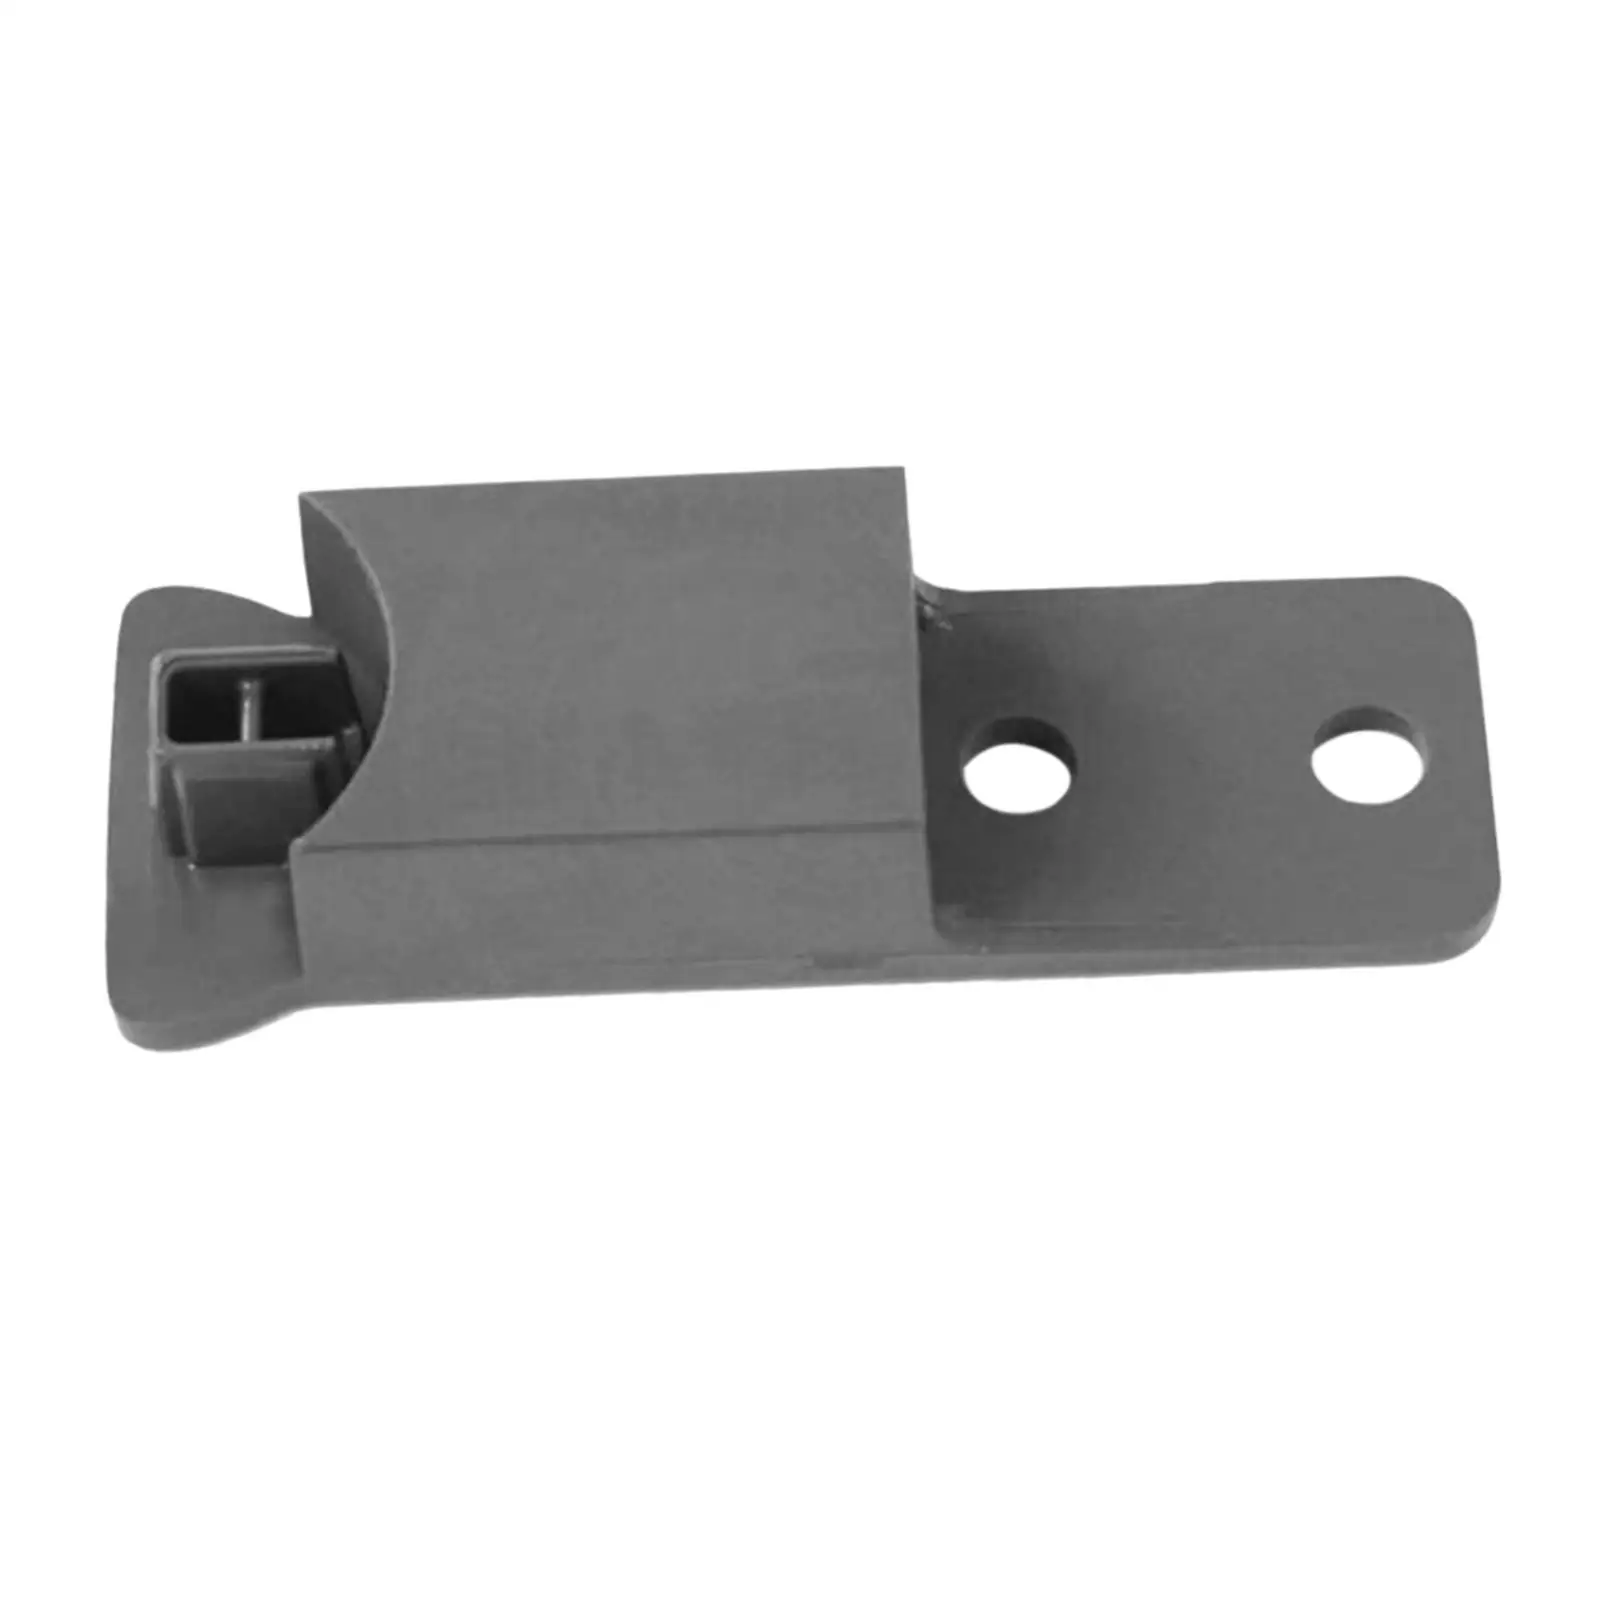 Handle End Cap Replaces Accessories Appliance Cap W10917049 AP6036240 W10838116 for Whirlpool Refrigerator